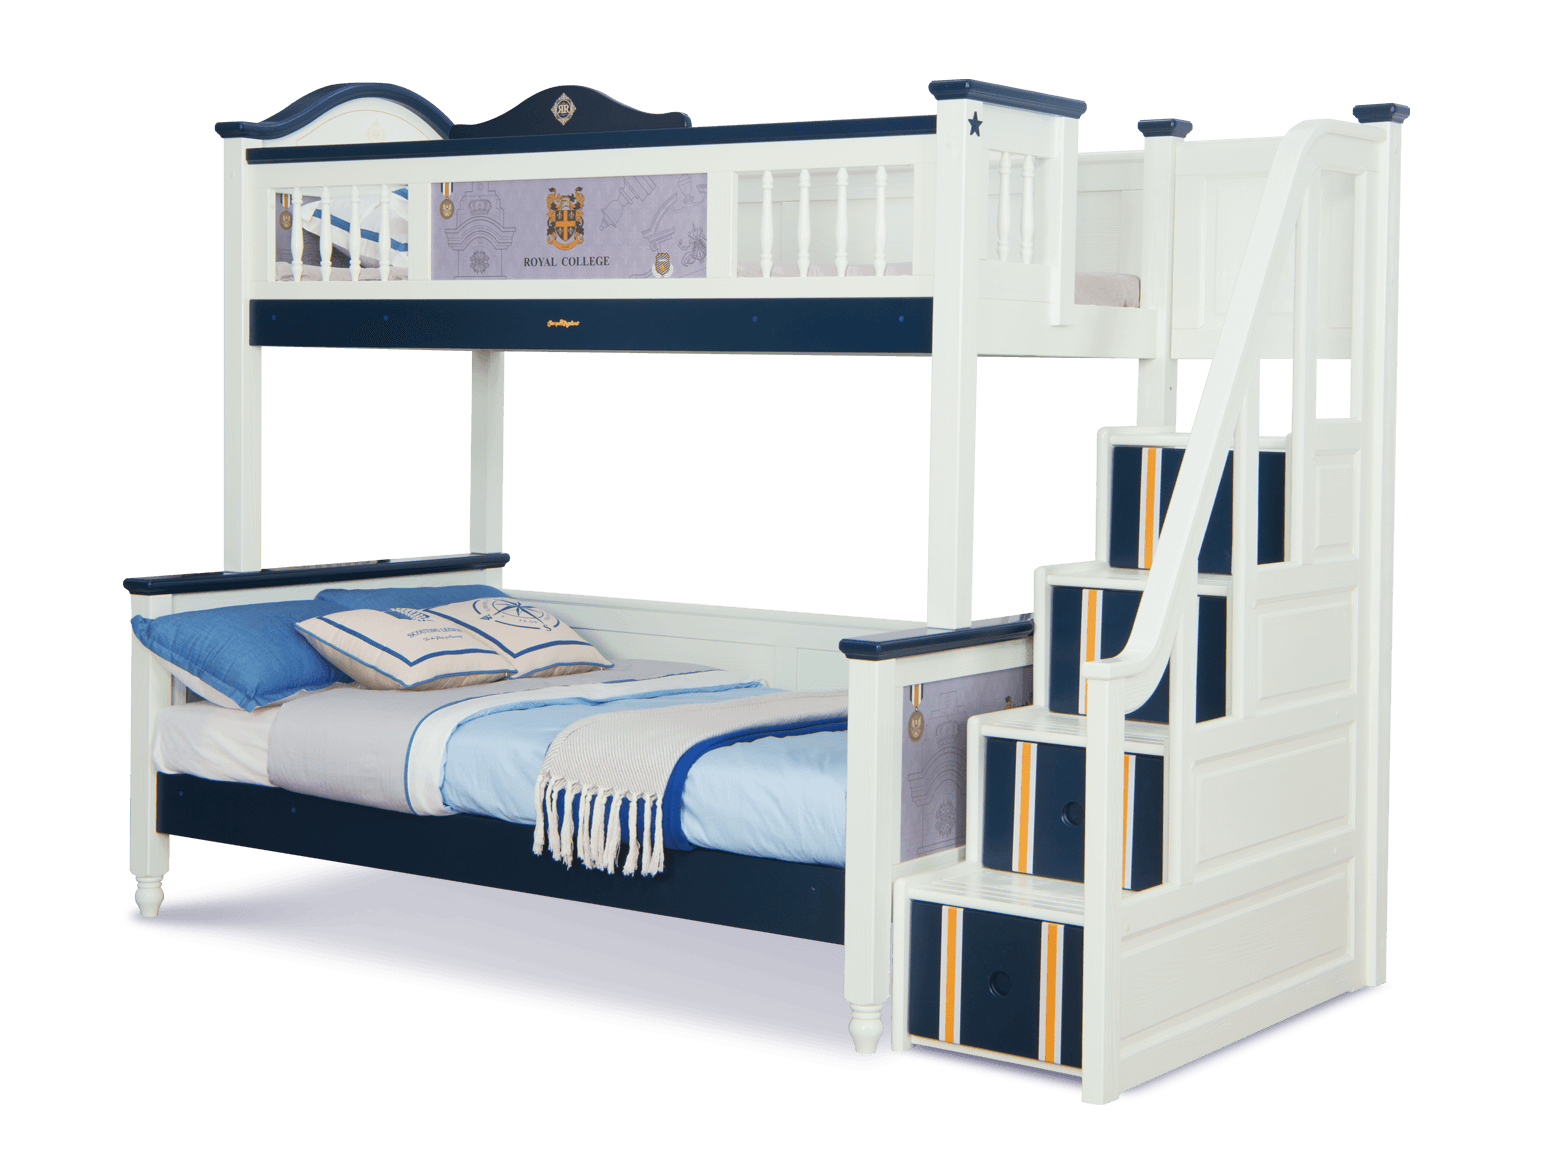 Sampo British Style Bunk Bed w Staircase - Kids Haven